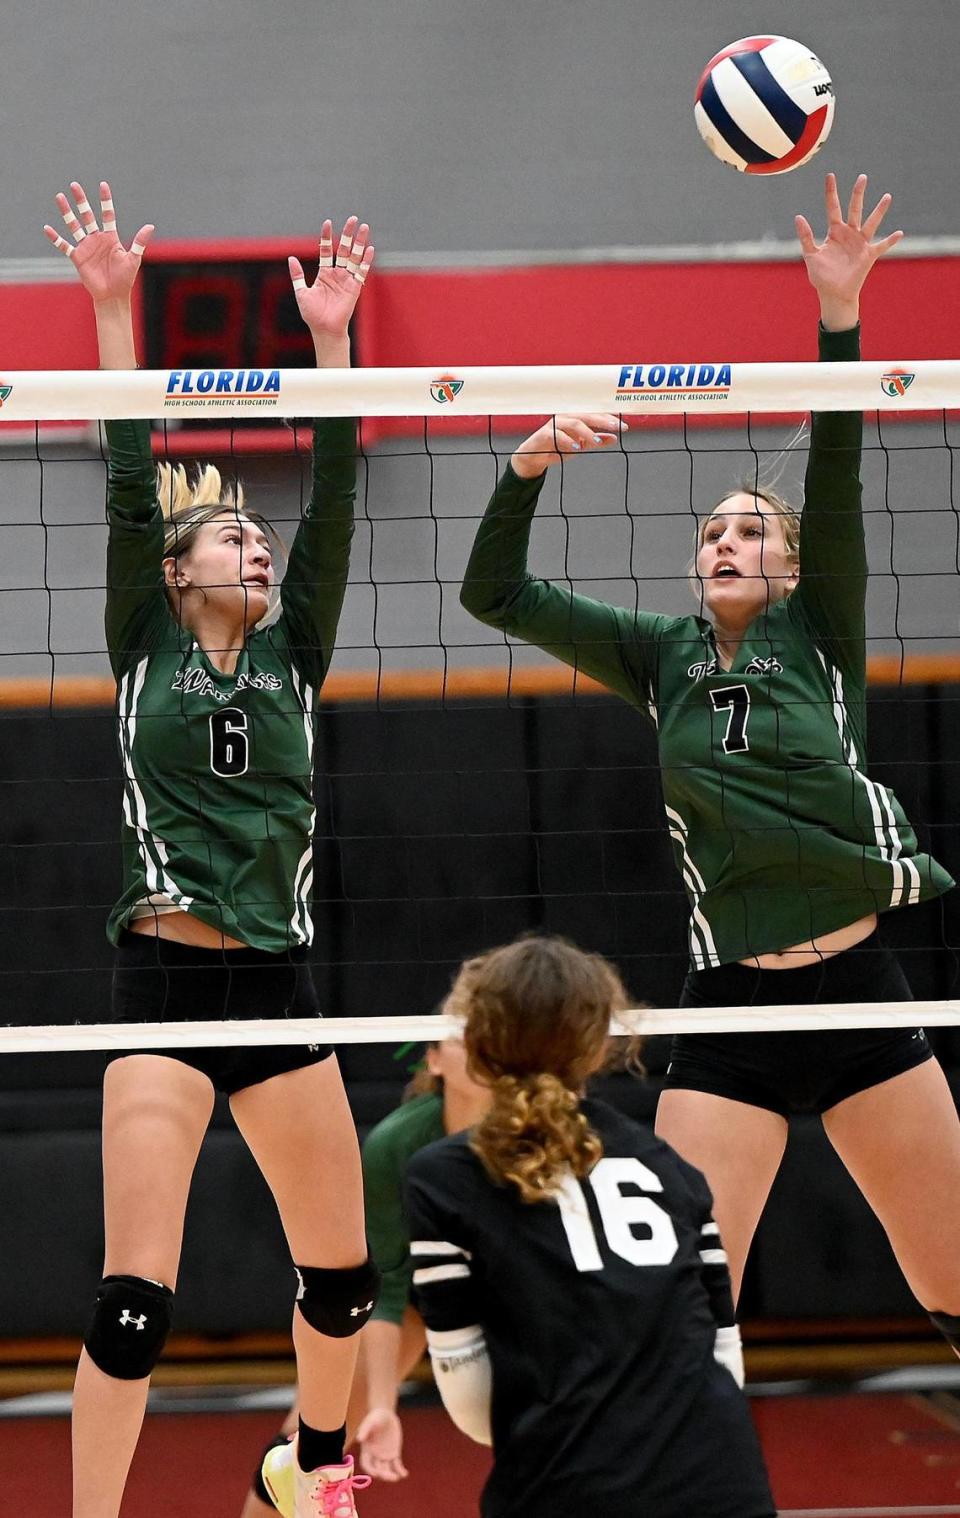 Westminster Christian School players go for a block at the net during their Class 3A state championship match against Clearwater Central Catholic at Polk State College on Sunday November 13th, 2022.